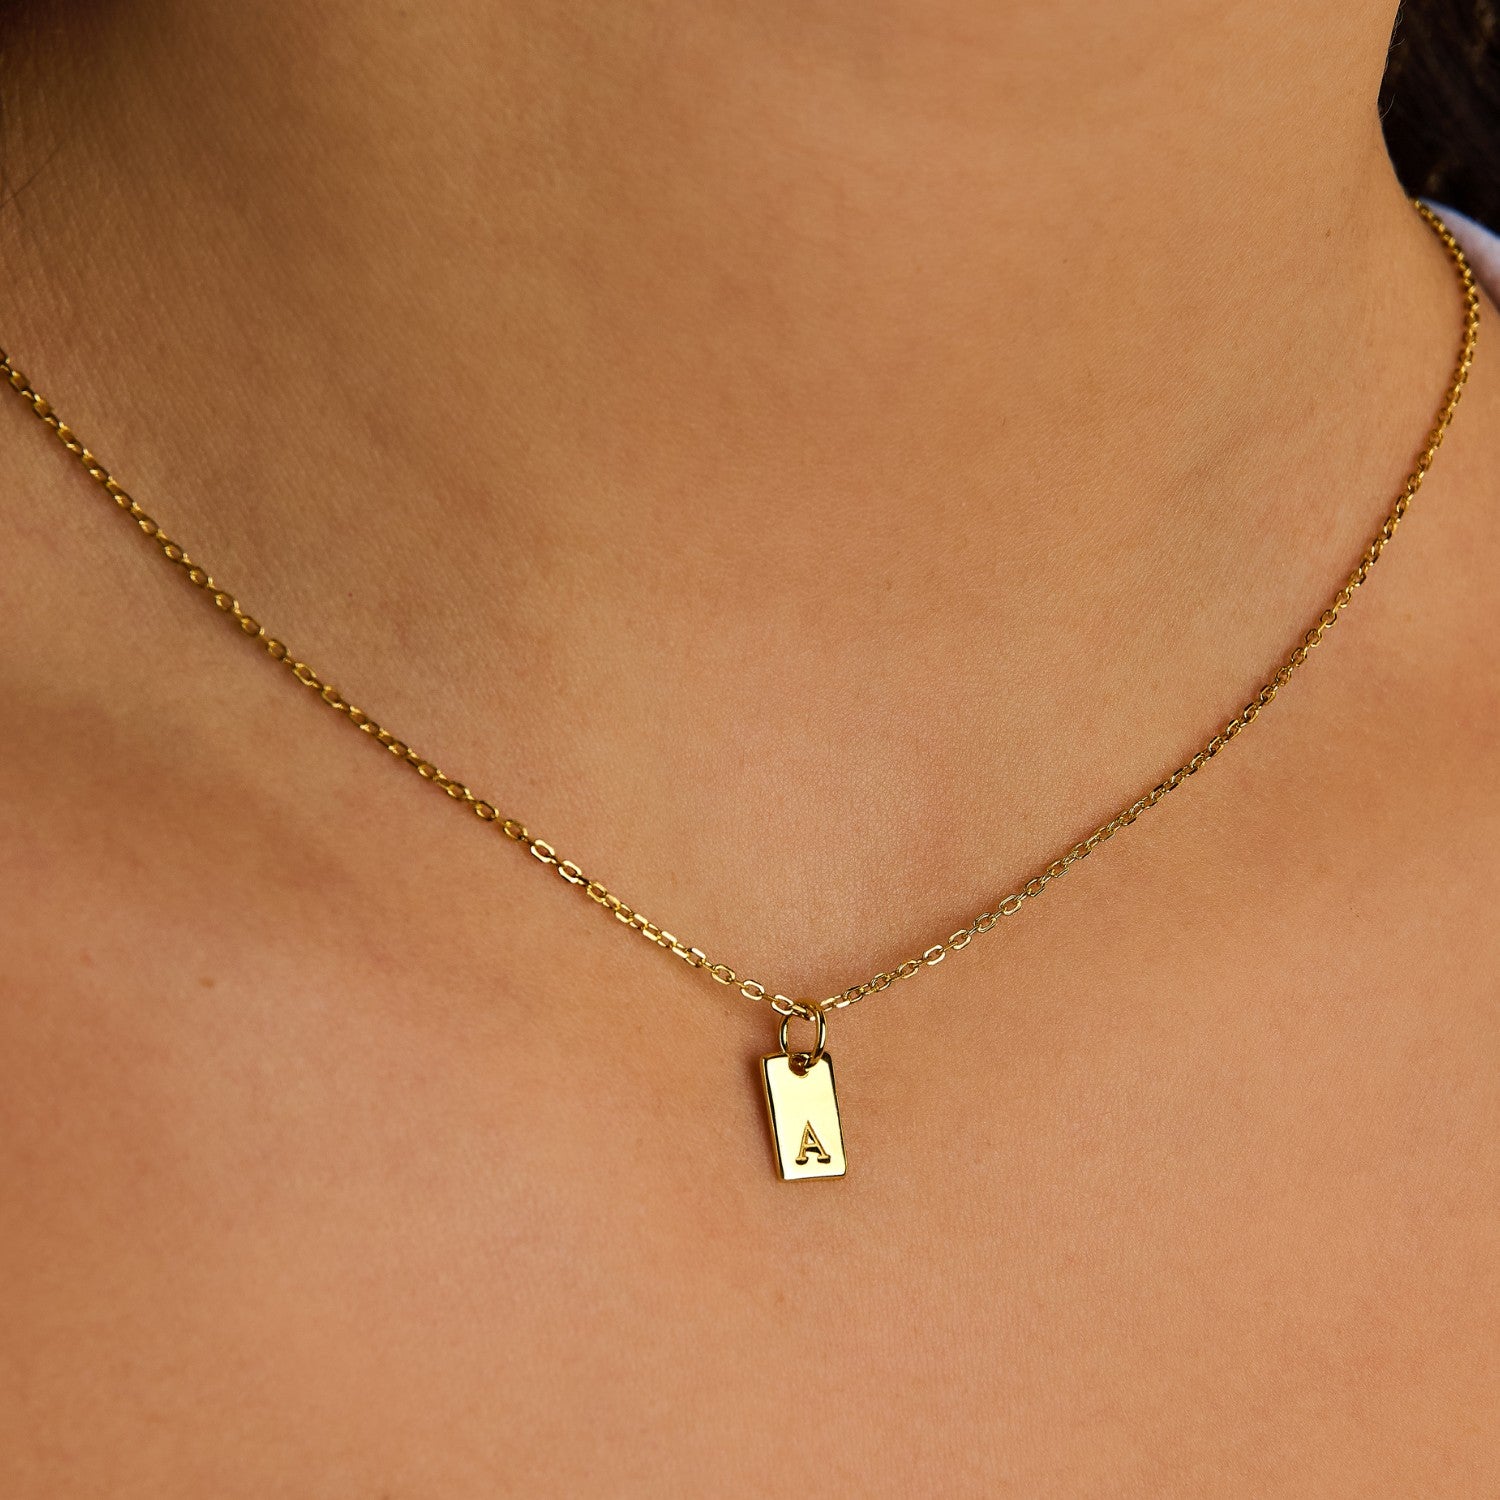 Tag Initial Necklace for Mom in 14k Gold Filled | Two Tags | Little Sky Stone